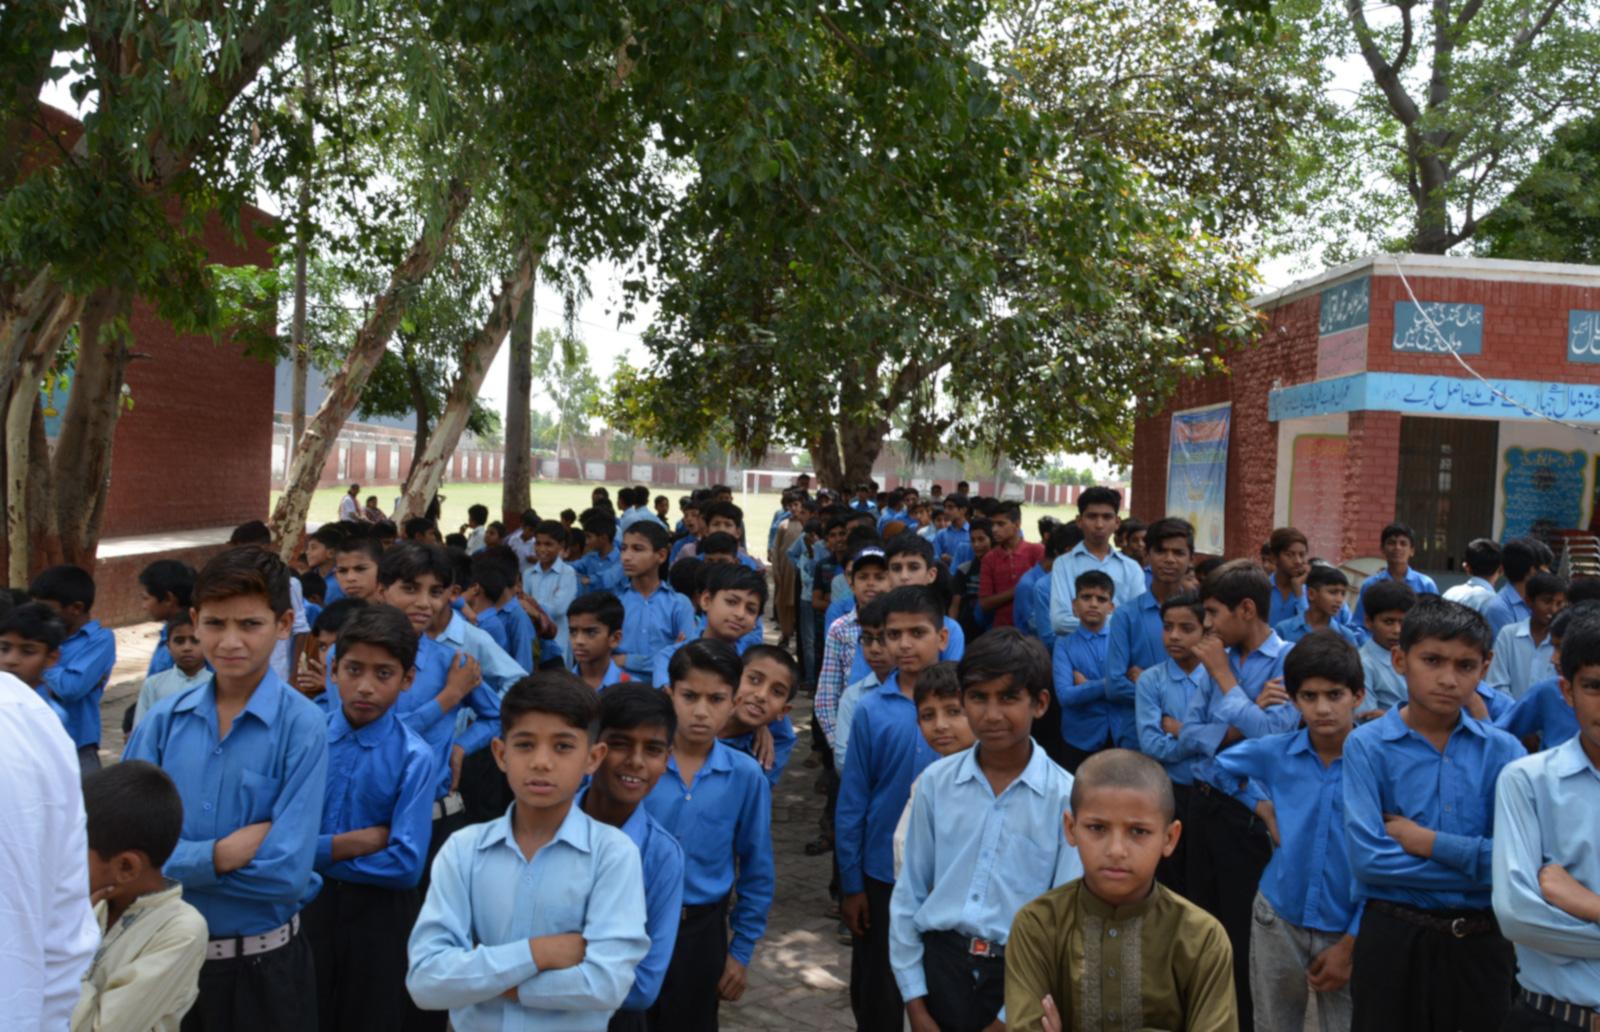 Children in blue shirts standing together facing the camera